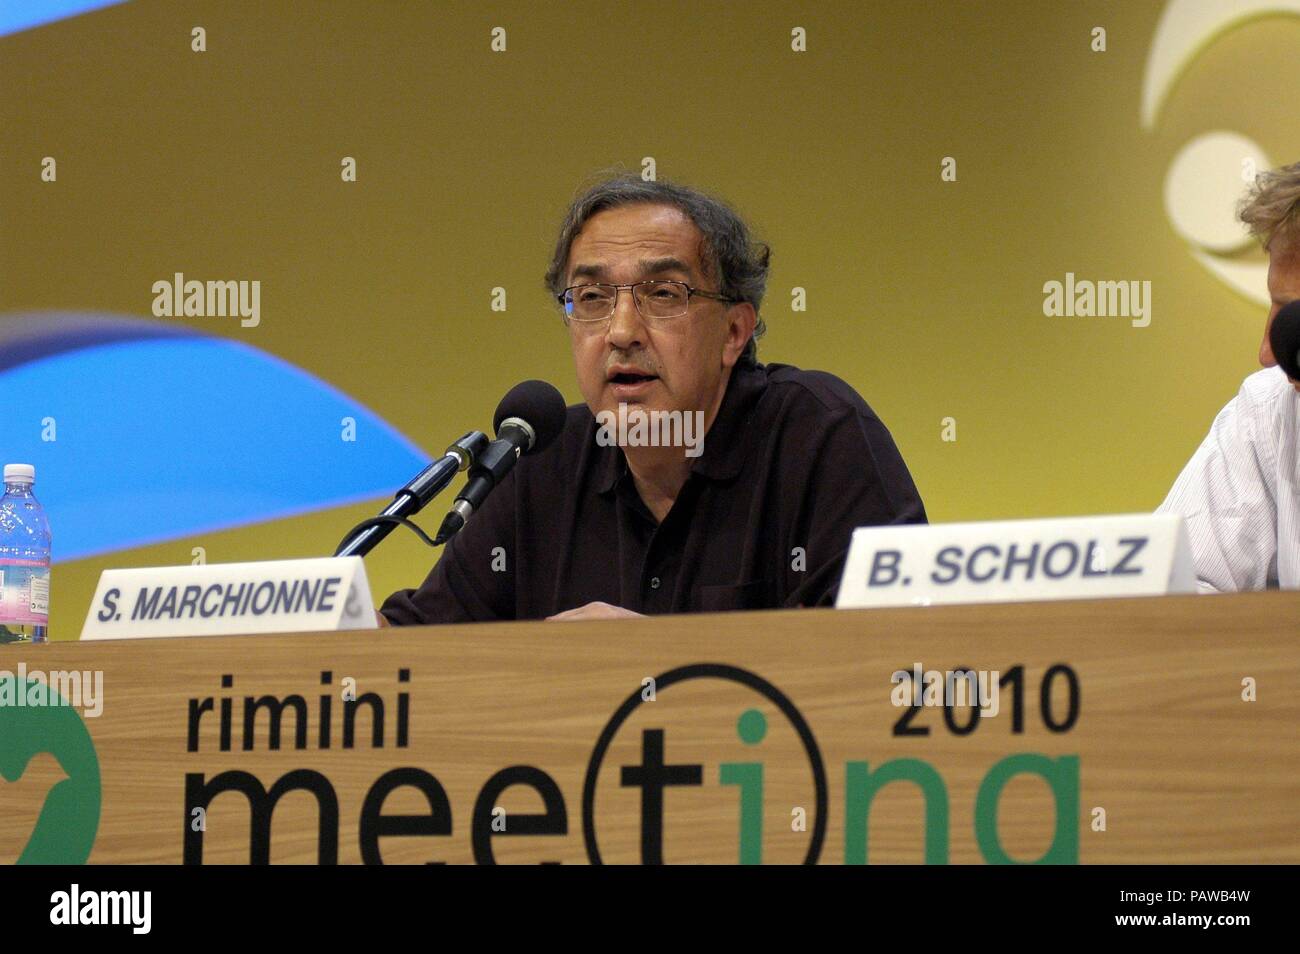 MEETING OF THE PEOPLE OF RIMINI OF COMMUNION AND LIBERATION. INTERVENTION SERGIO MARCHIONNE CHIEF EXECUTIVE OFFICER FIAT (Francesco Campani, RIMINI - 2010-08-26) ps the photo can be used respecting the context in which it was taken, and without the defamatory intent of the decoration of the people represented (Francesco Campani, Foto Repertorio - 2018-07-25) ps the photo can be used respecting the context in which it was taken, and without the defamatory intent of the decoration of the people represented Stock Photo